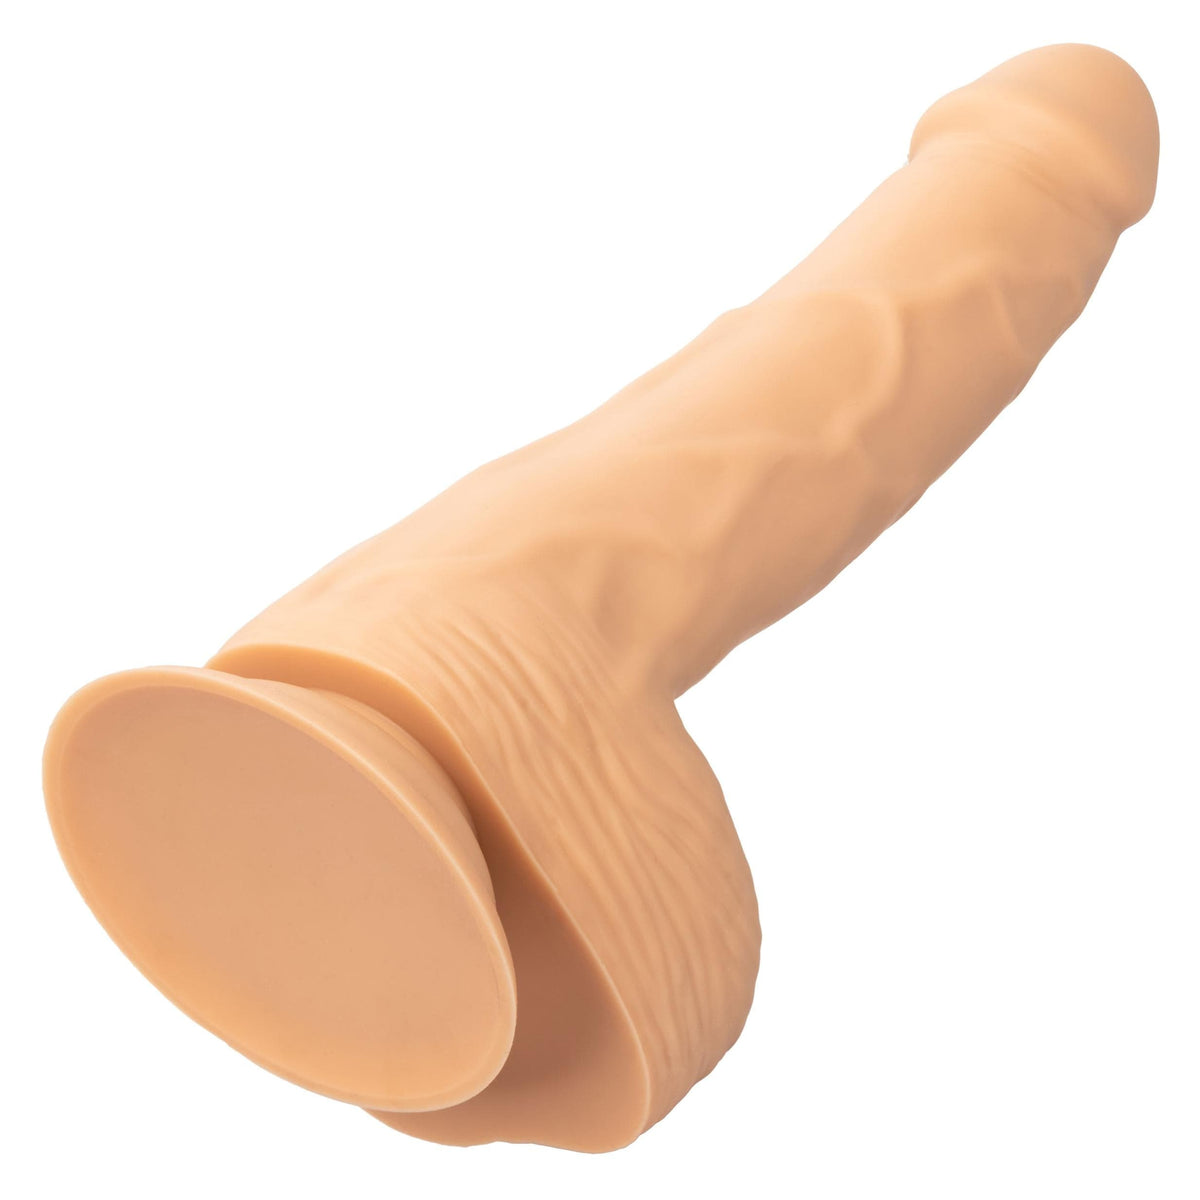 new sex toys for men, new sex toys for women and new sex toys for couples.